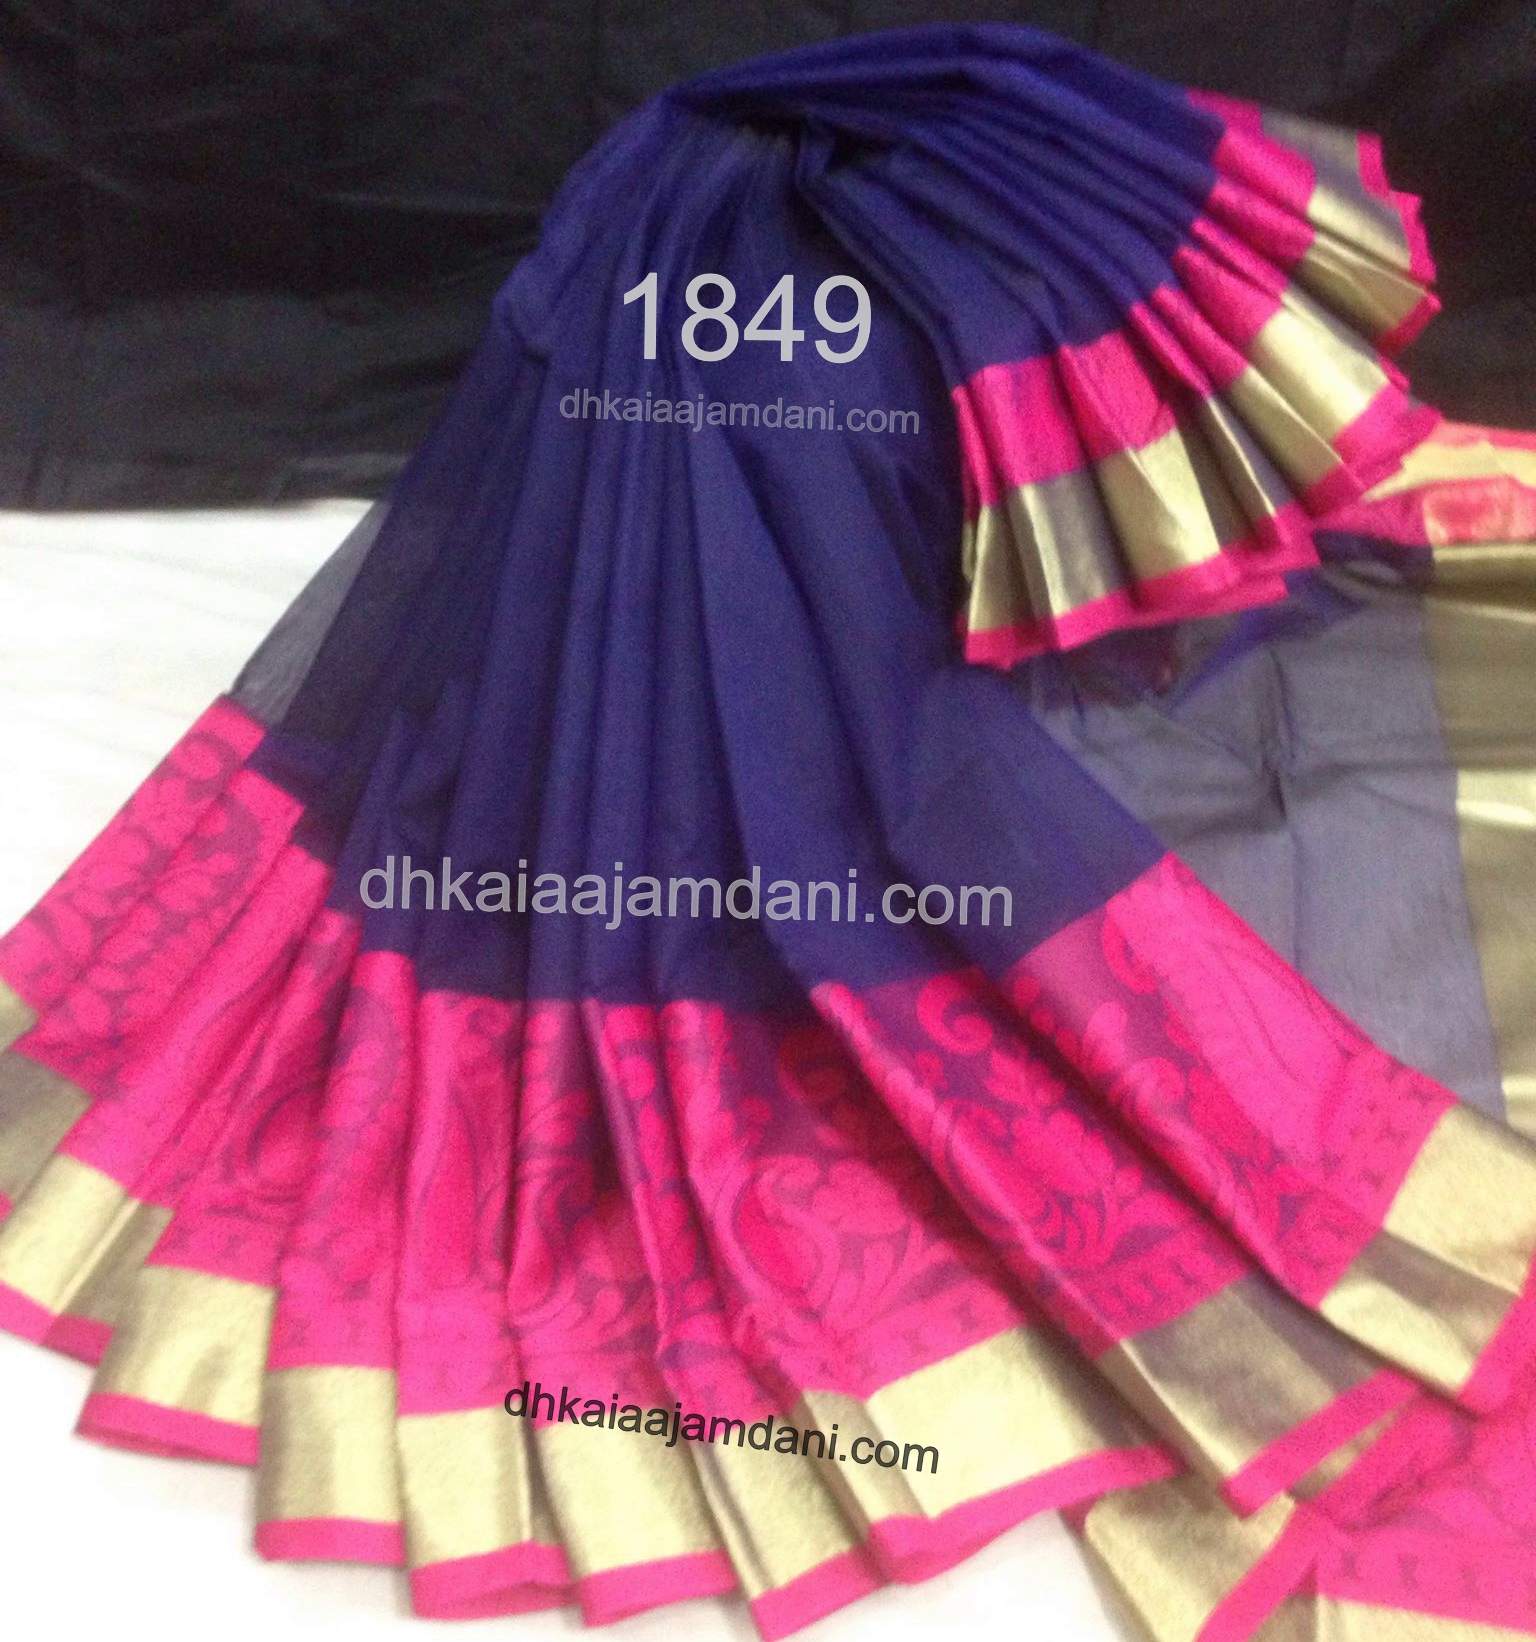 Code: 1849, Price: 1500tk
Delivery Charge: Free